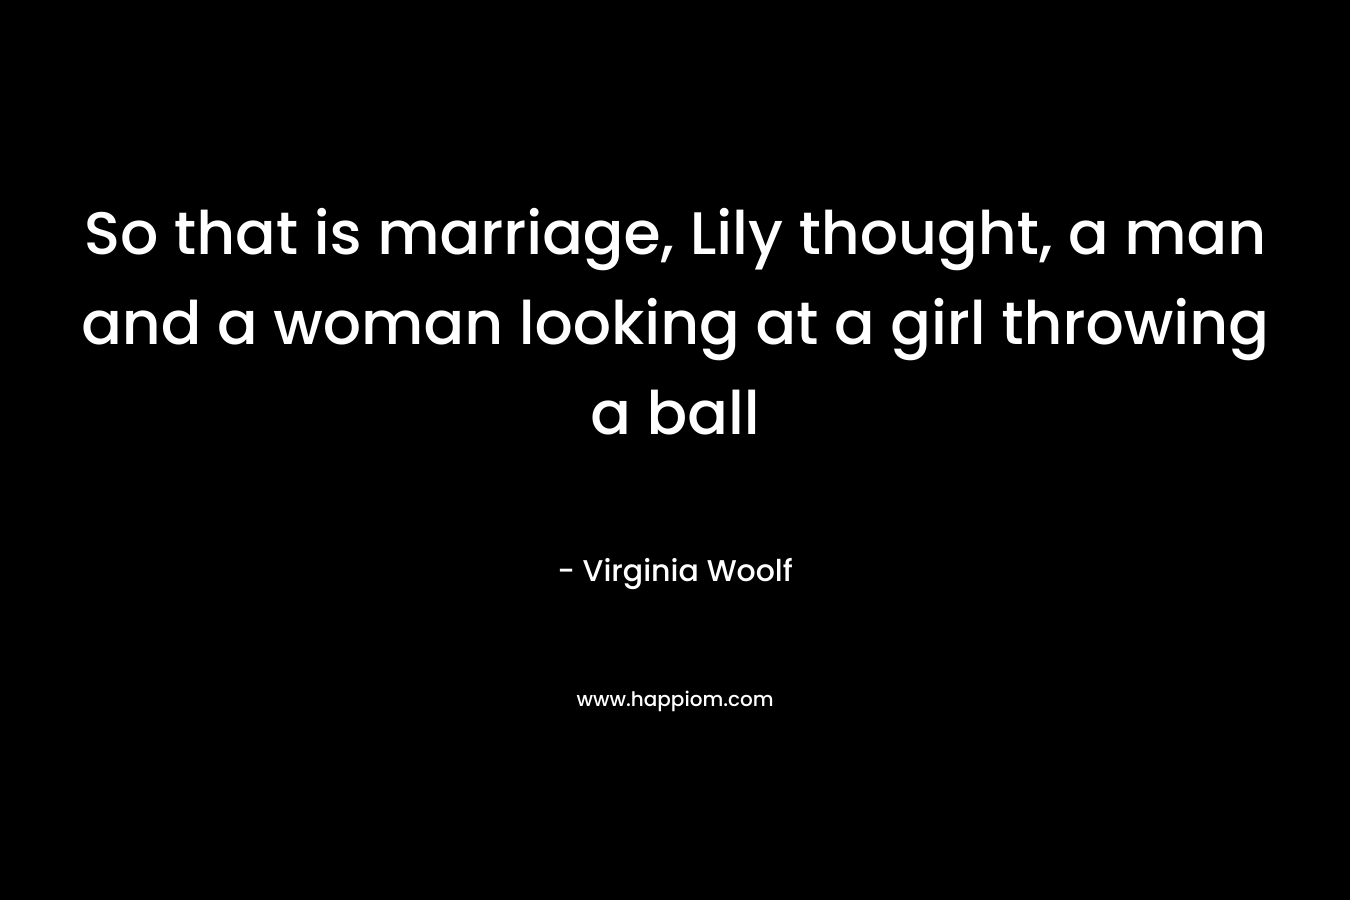 So that is marriage, Lily thought, a man and a woman looking at a girl throwing a ball